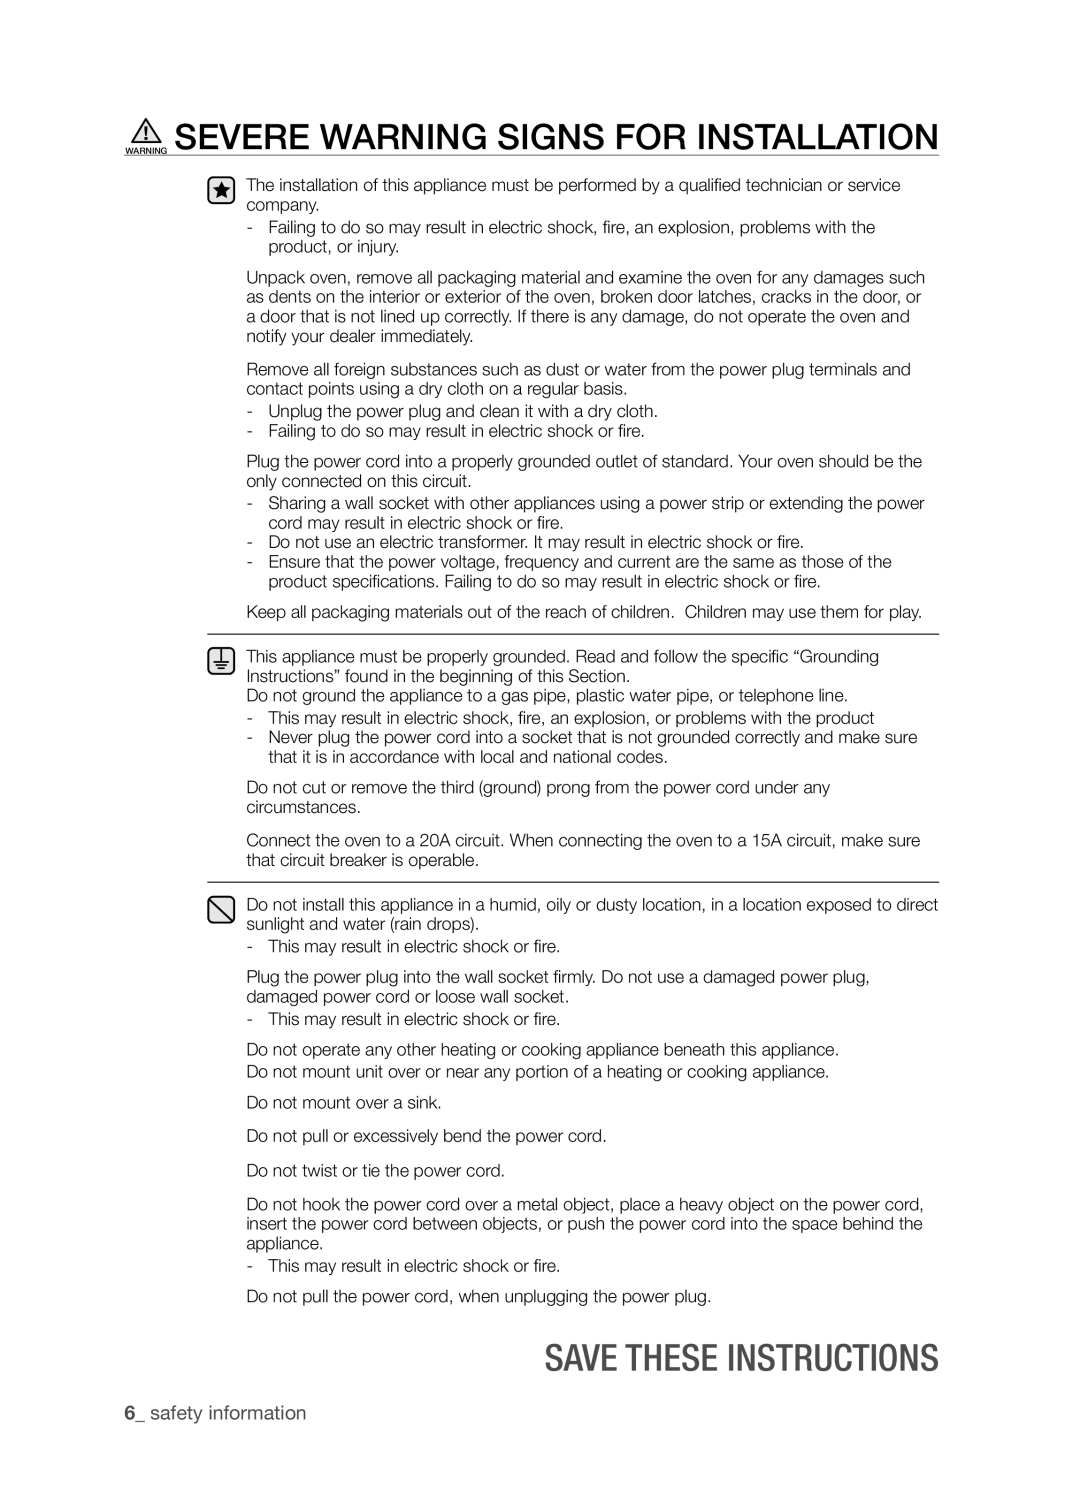 Samsung SMH9207 user manual Warning Severe Warning Signs For Installation, Save these instructions, safety information 